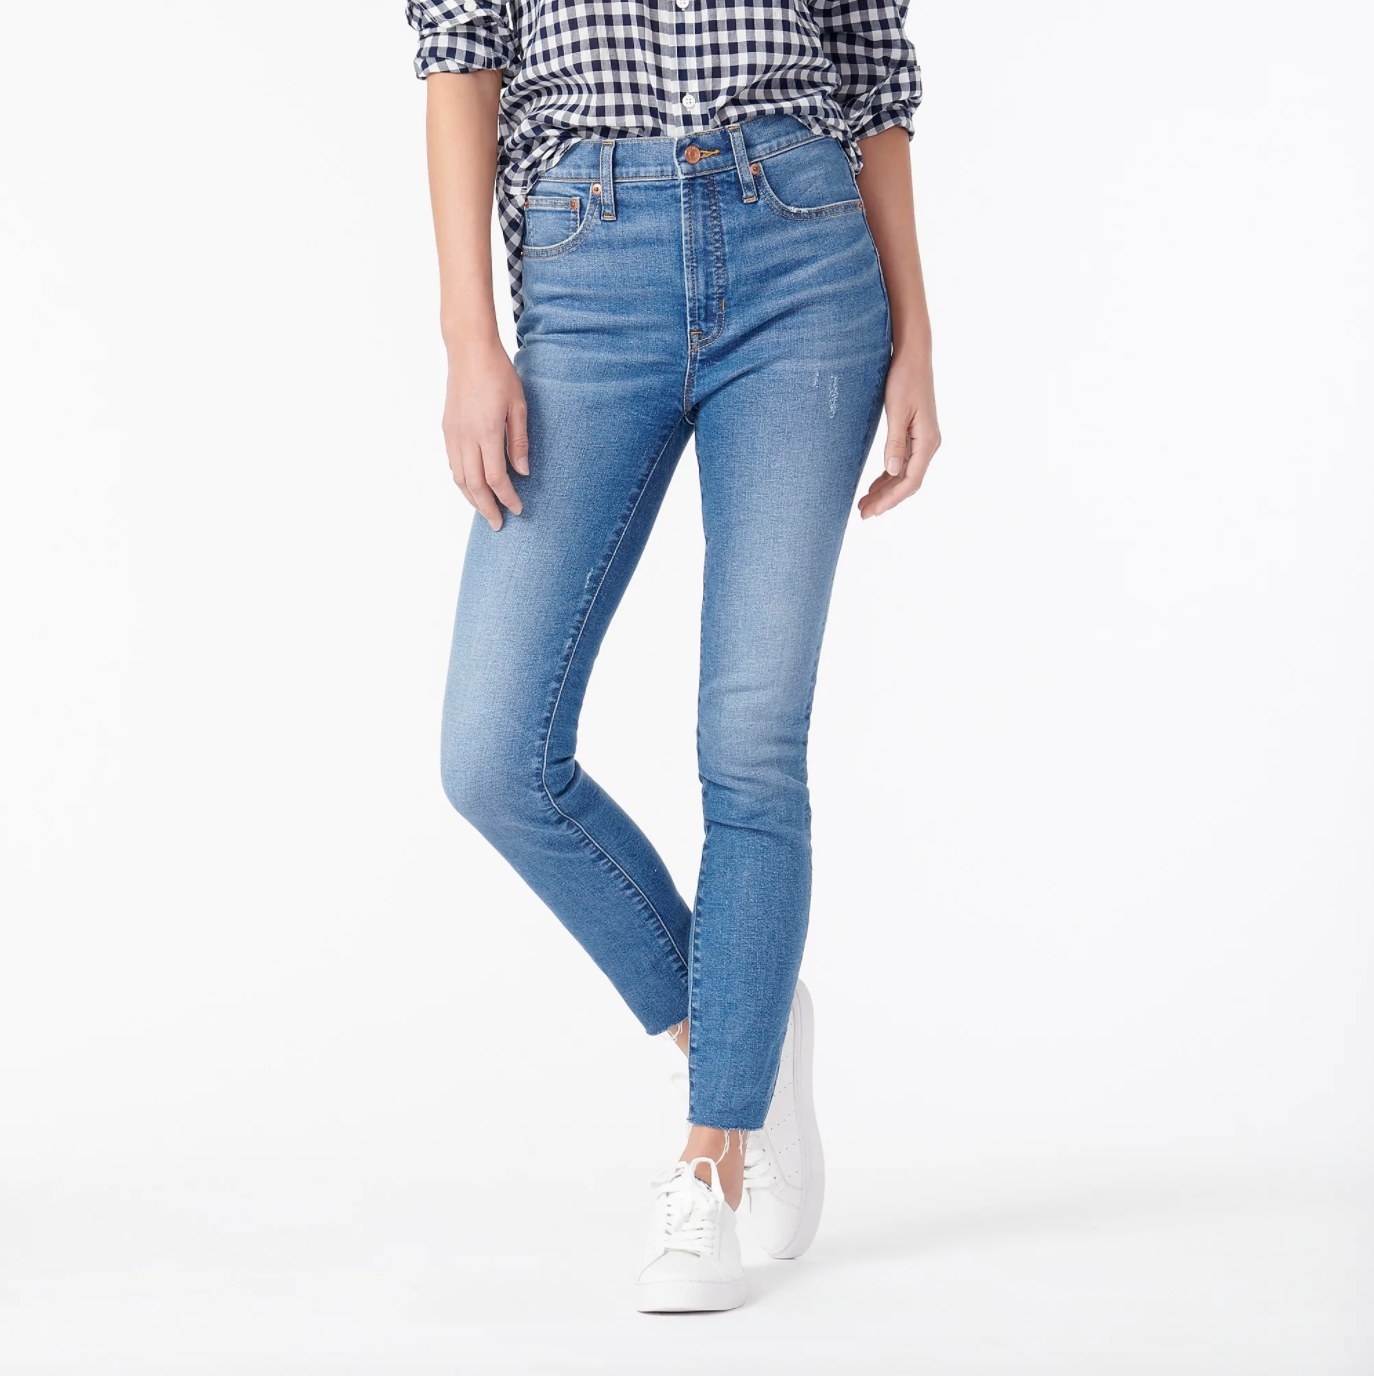 The pair of high-rise toothpick jeans in blue